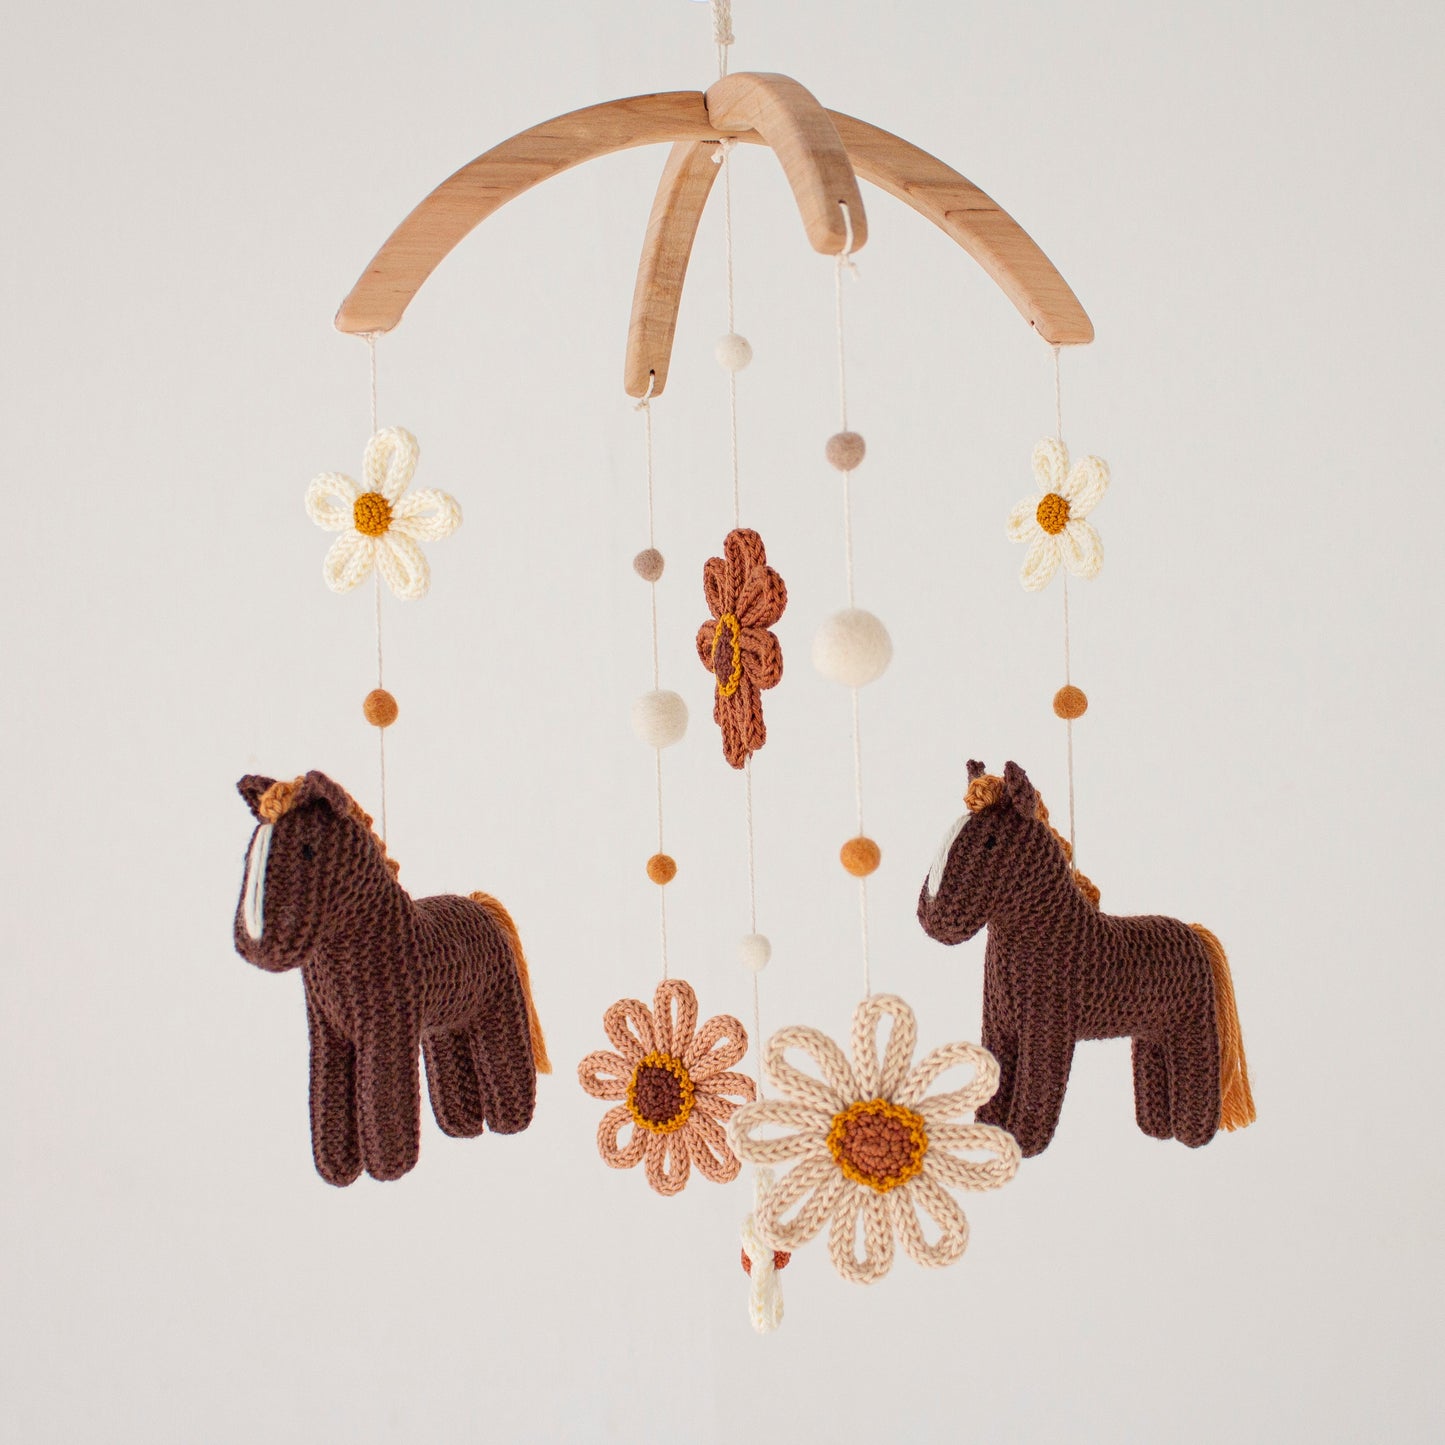 Horses, sunflowers & daisies baby mobile